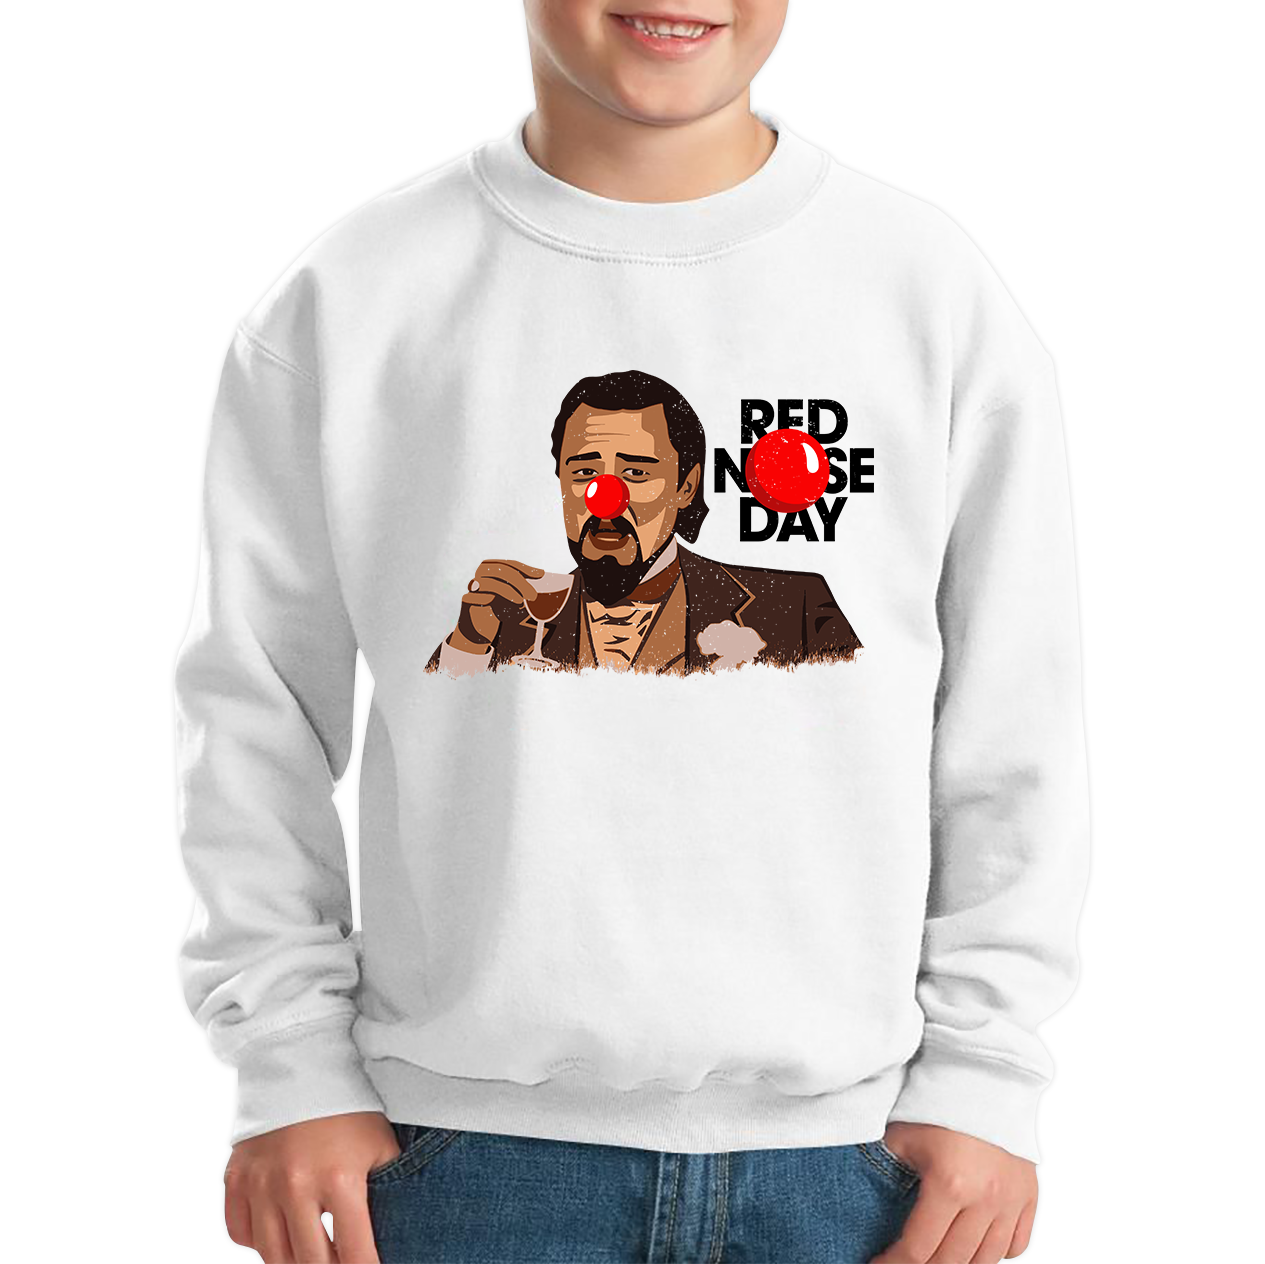 Leonardo Dicaprio Laughing Meme Red Nose Day Kids Sweatshirt. 50% Goes To Charity